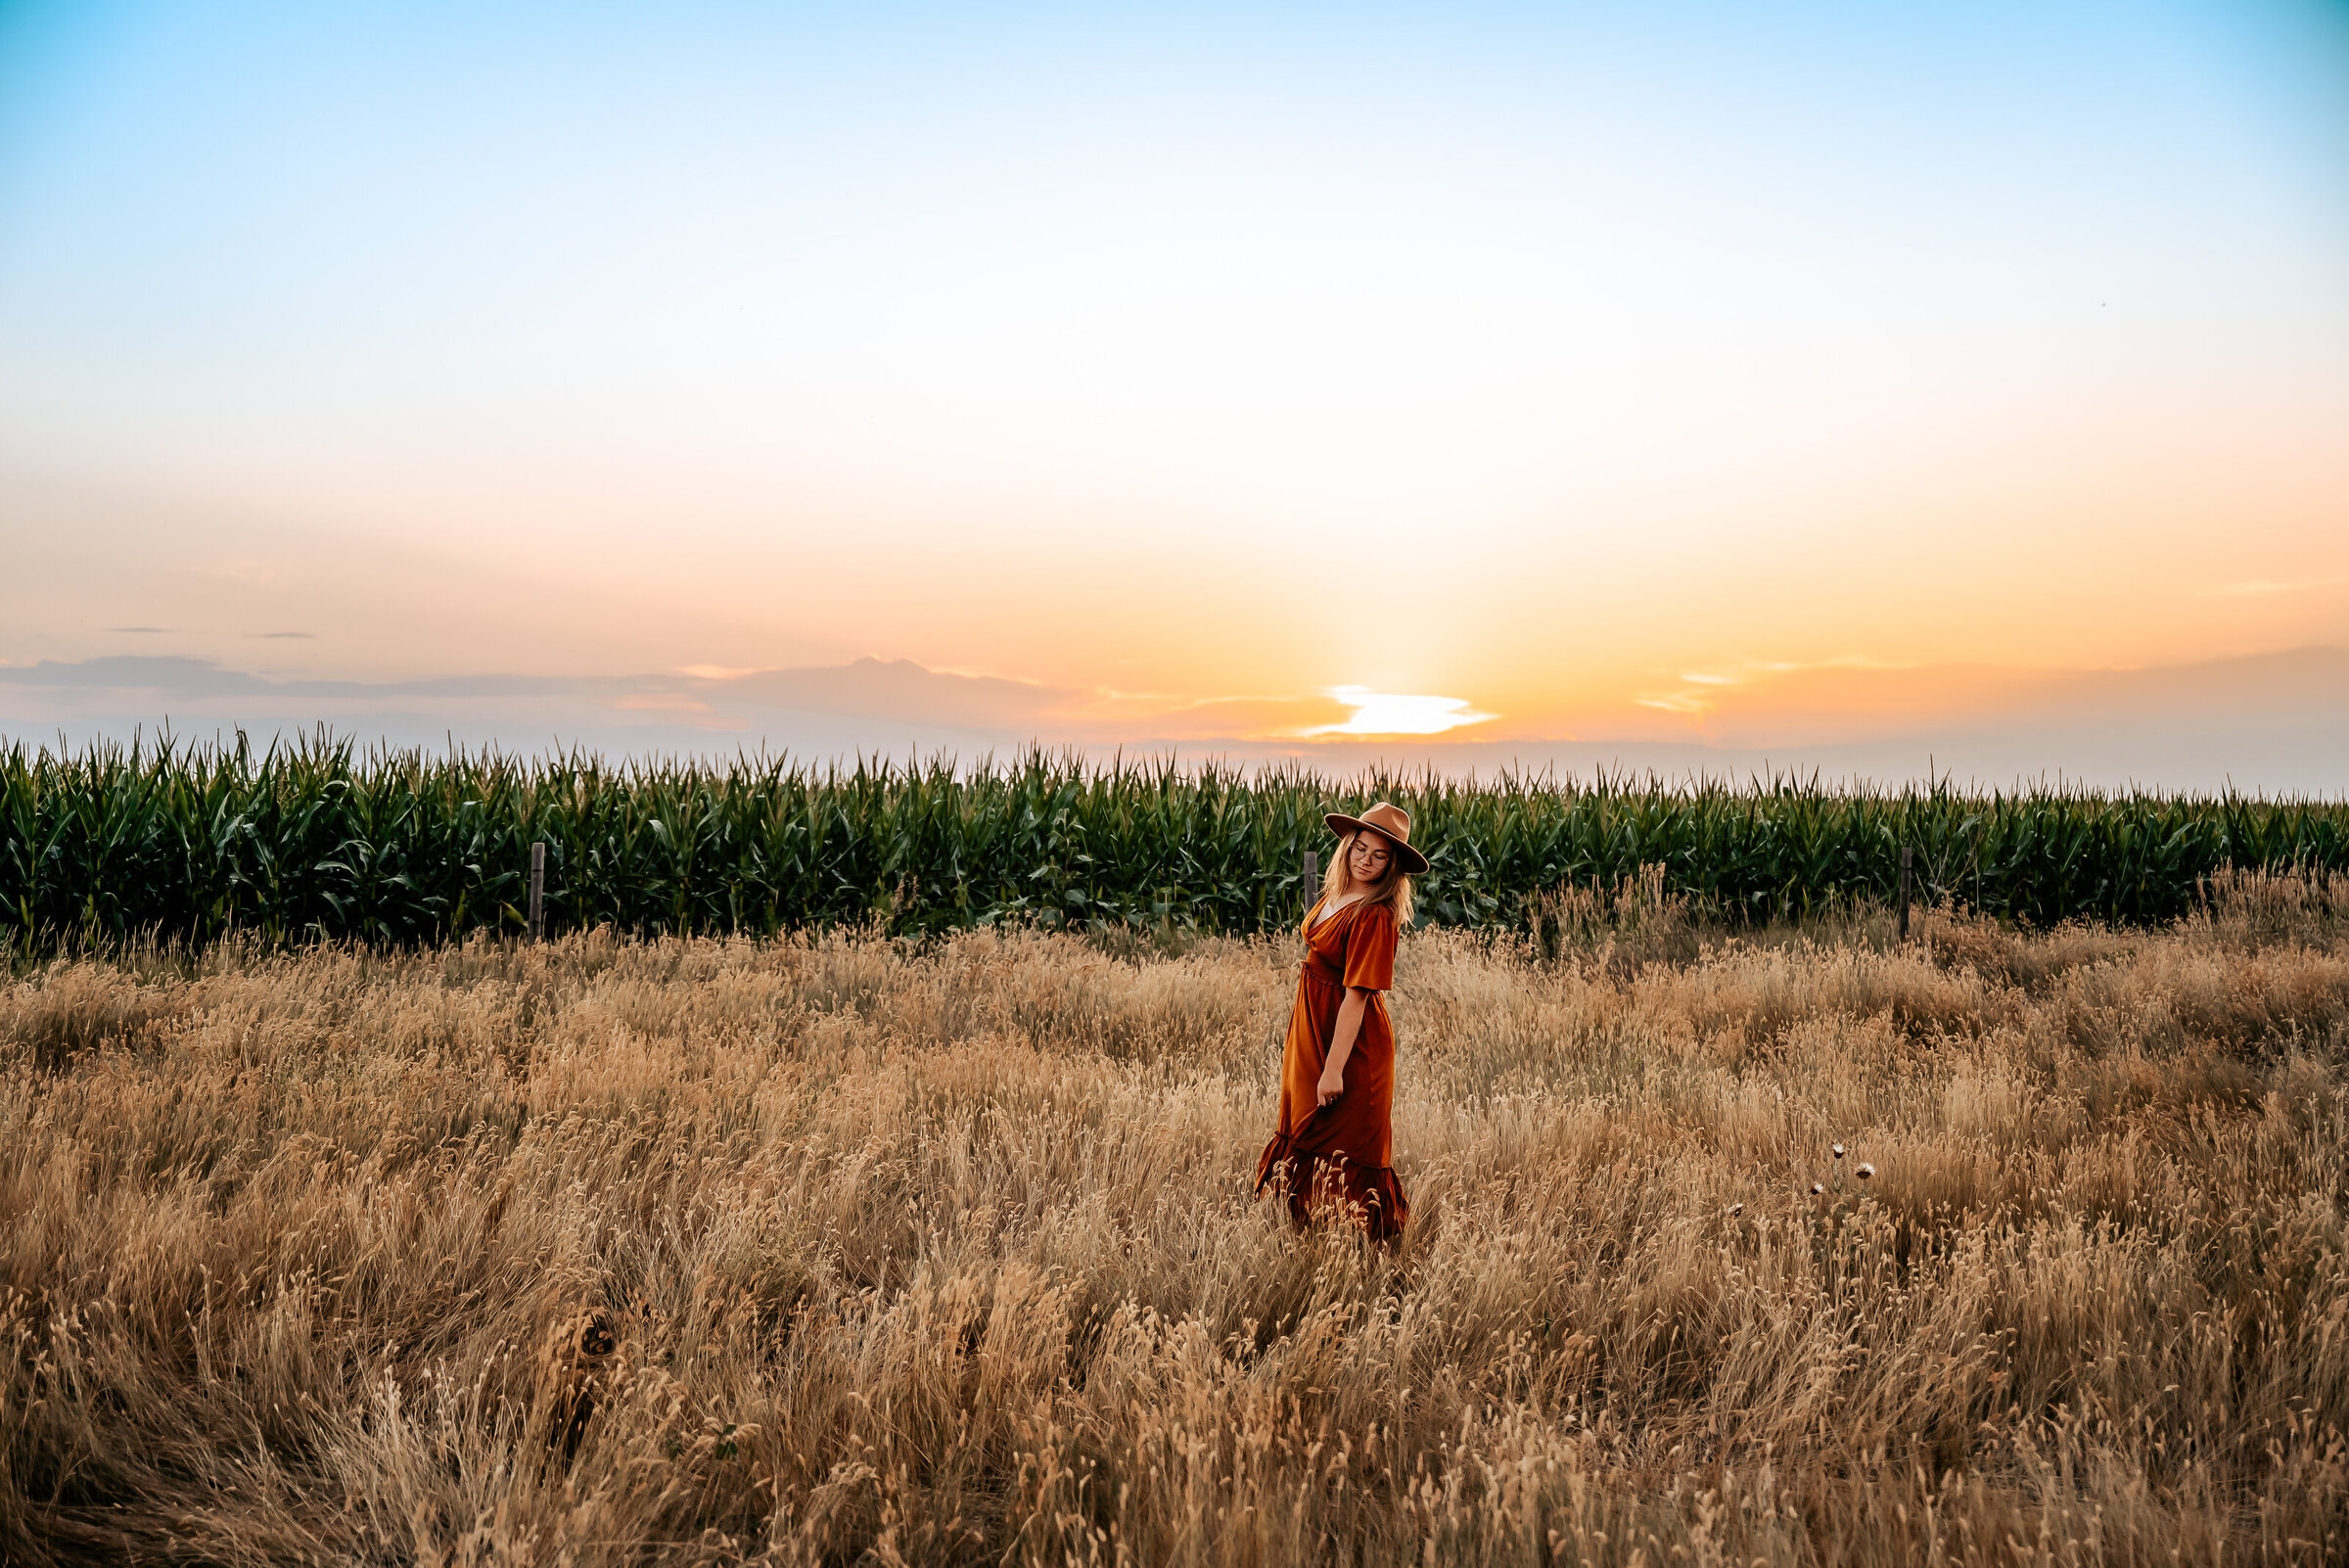 Girl walks through field in long grass with boho outfit